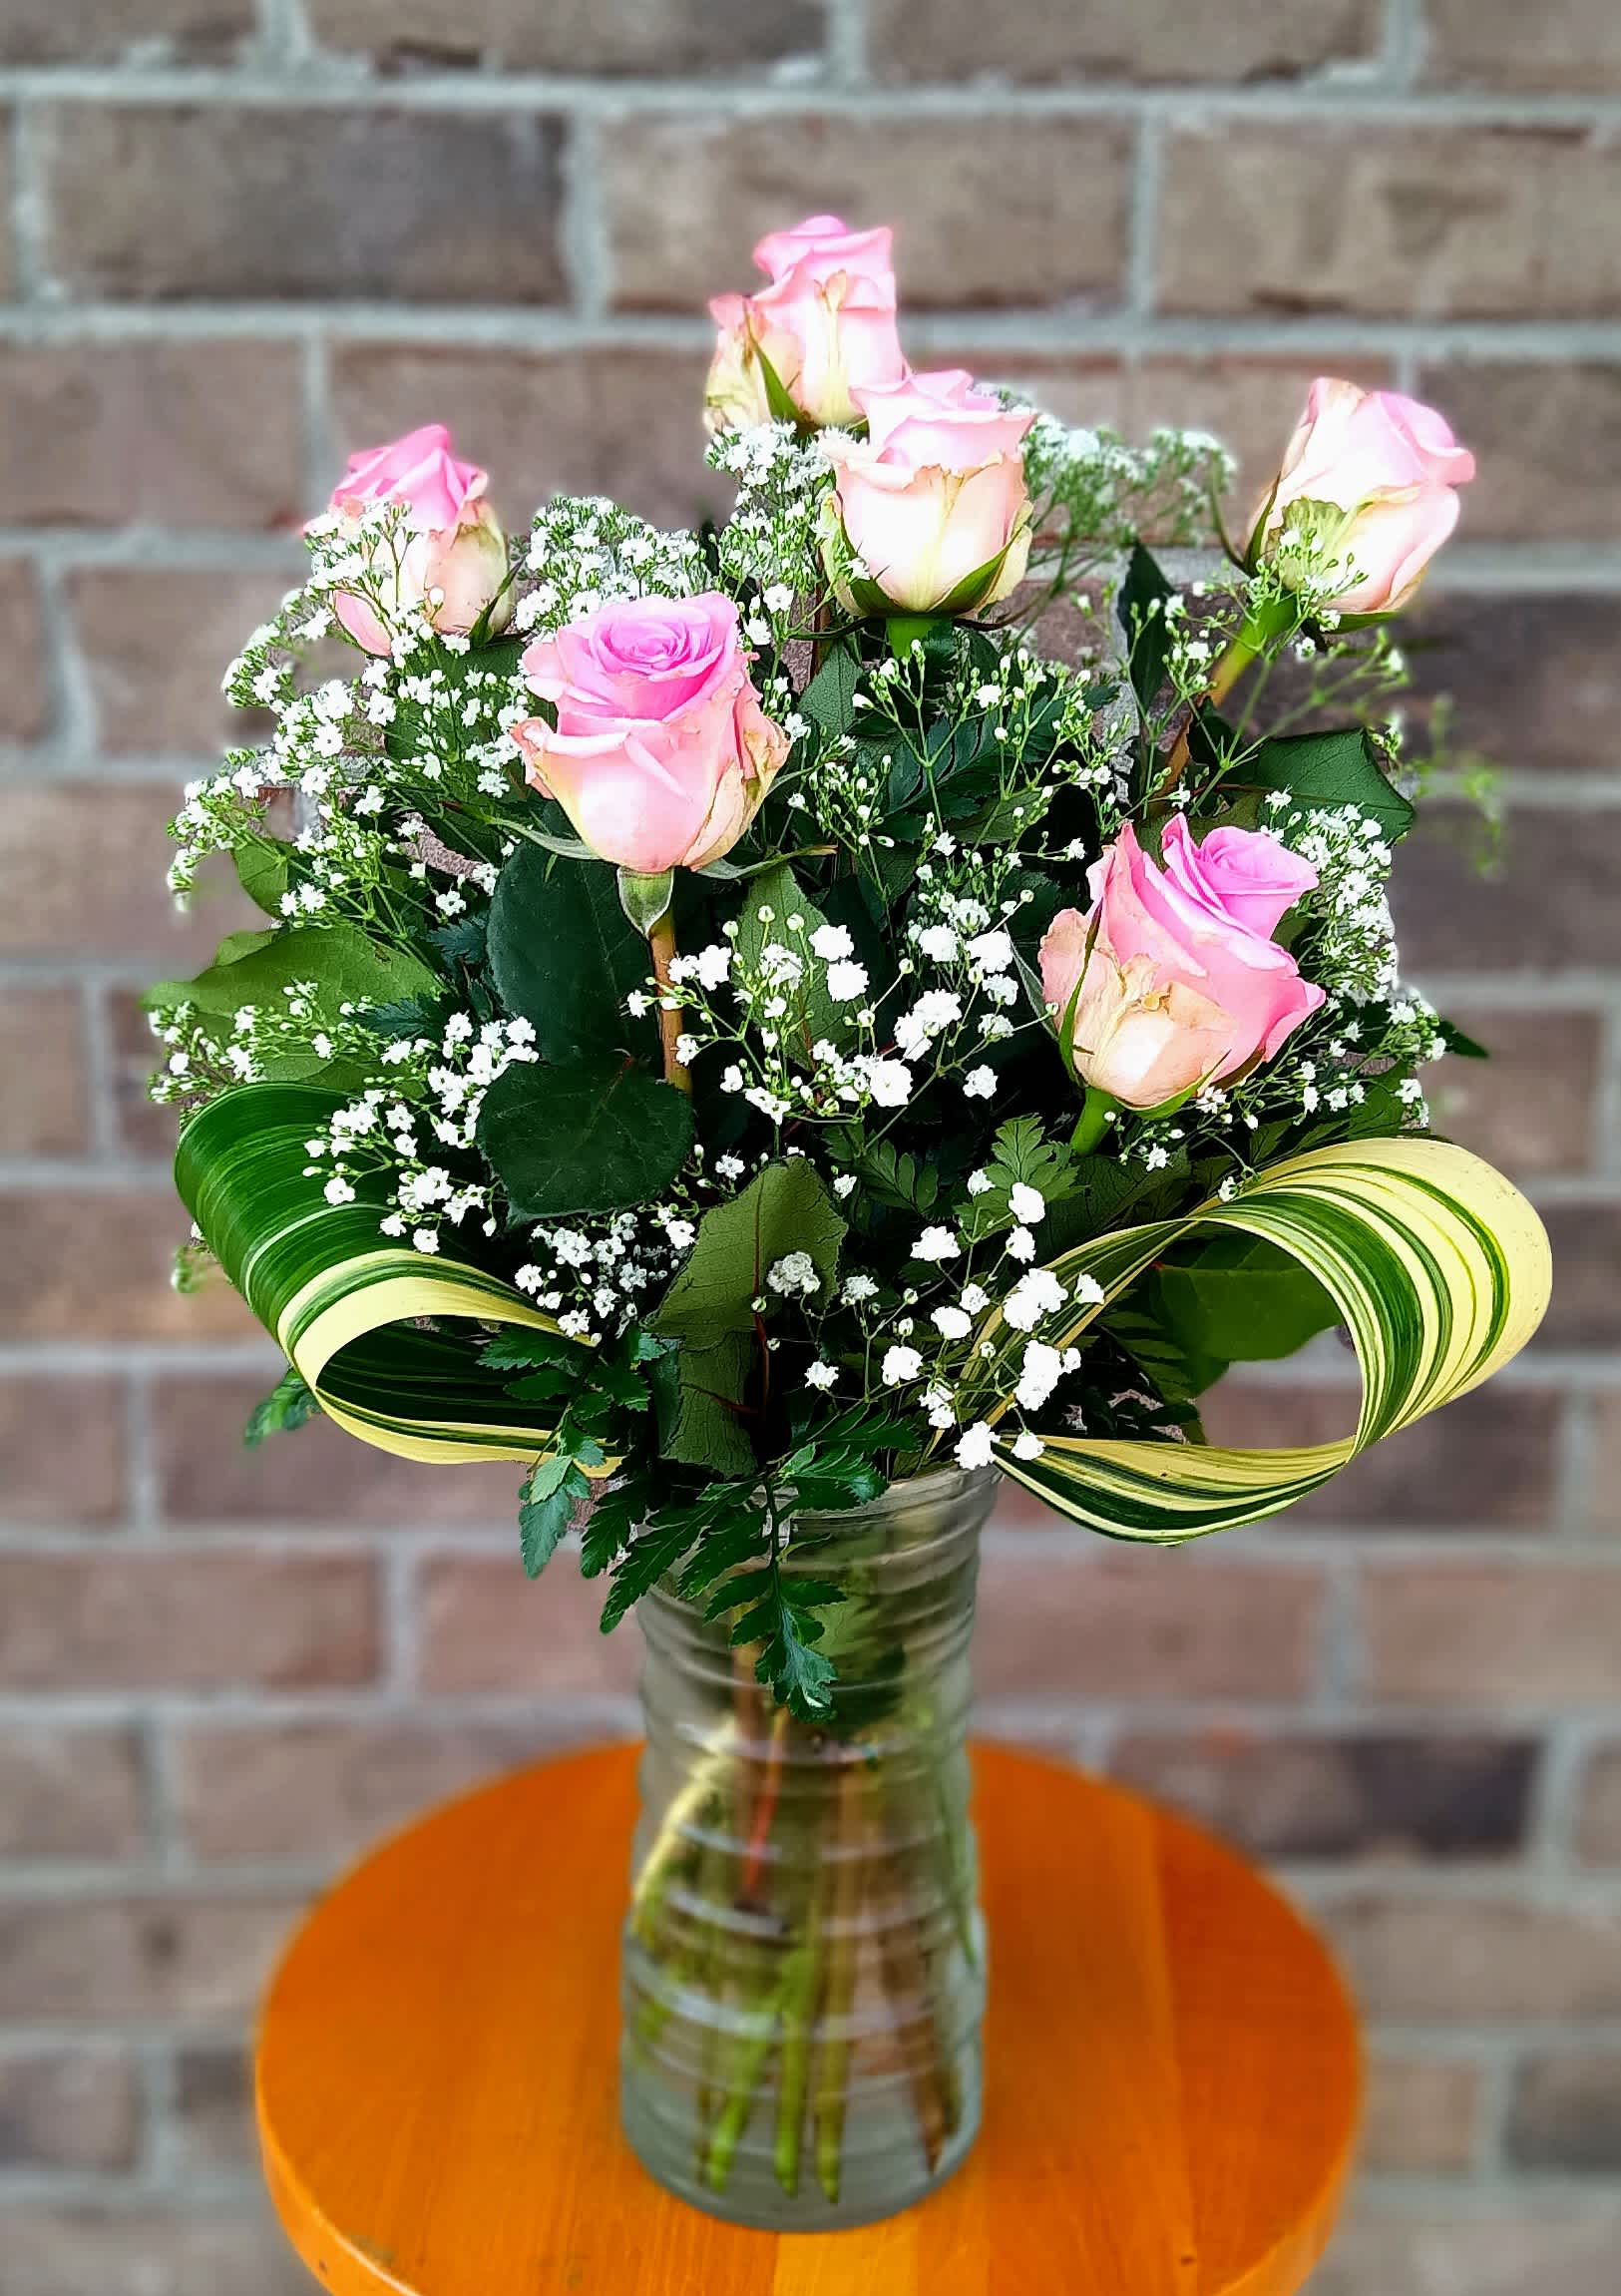 Half Dozen Roses -  A 1/2 dozen of roses.  Available in red, white, lavender, pink and yellow